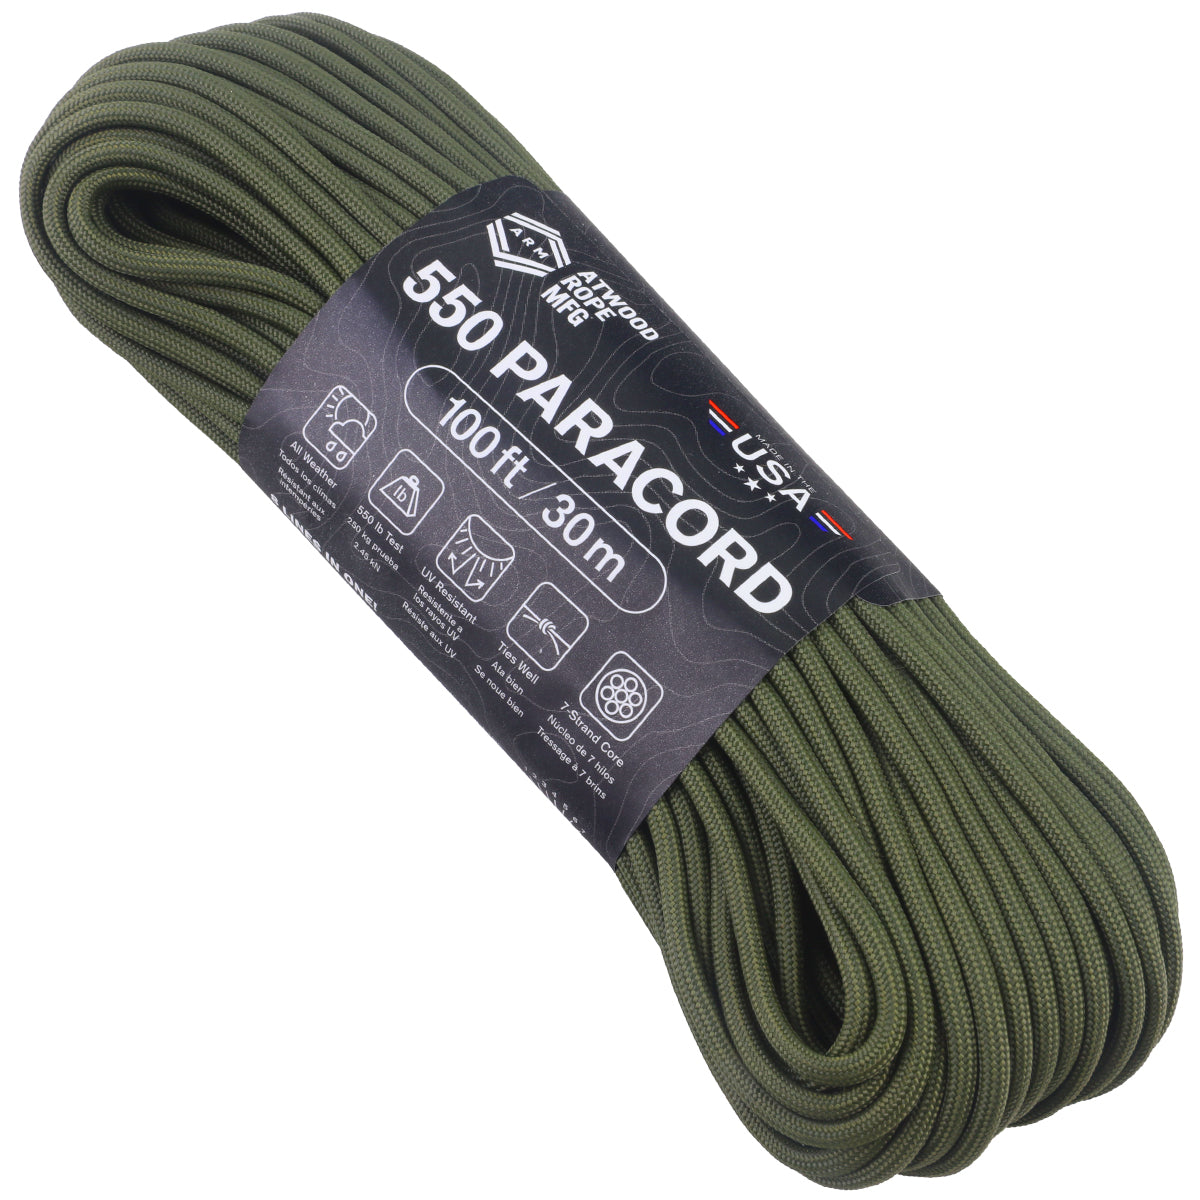 Atwood 550lbs Paracord 7 cores 100ft (Black)